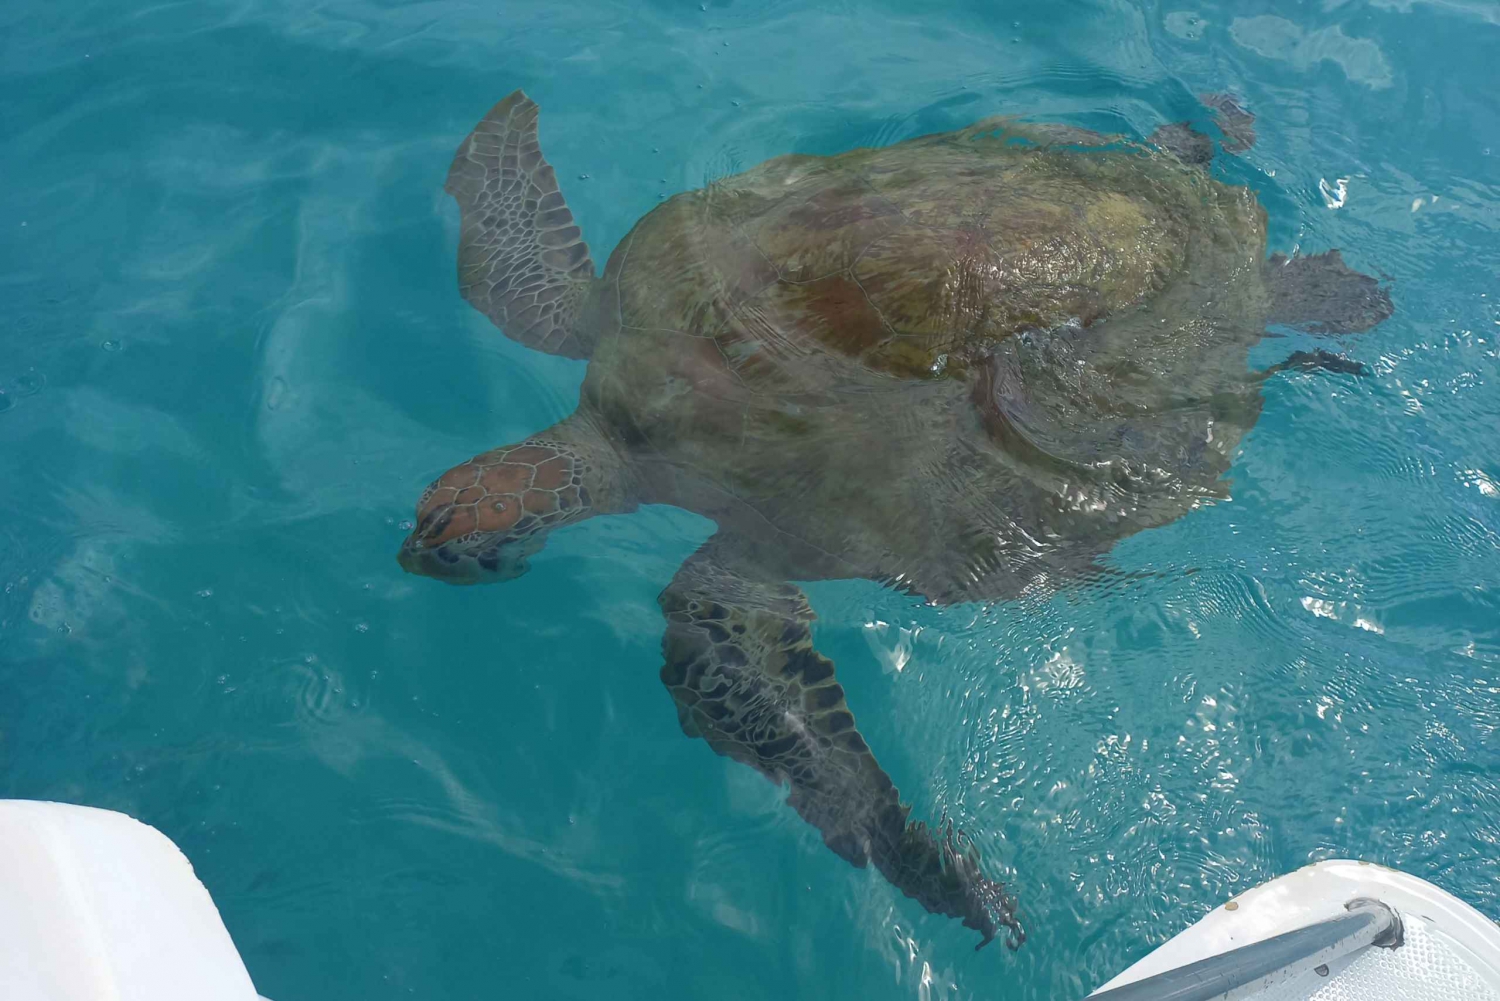 Mauritius: Snorkeling with turtles Le Transporteur speedboat